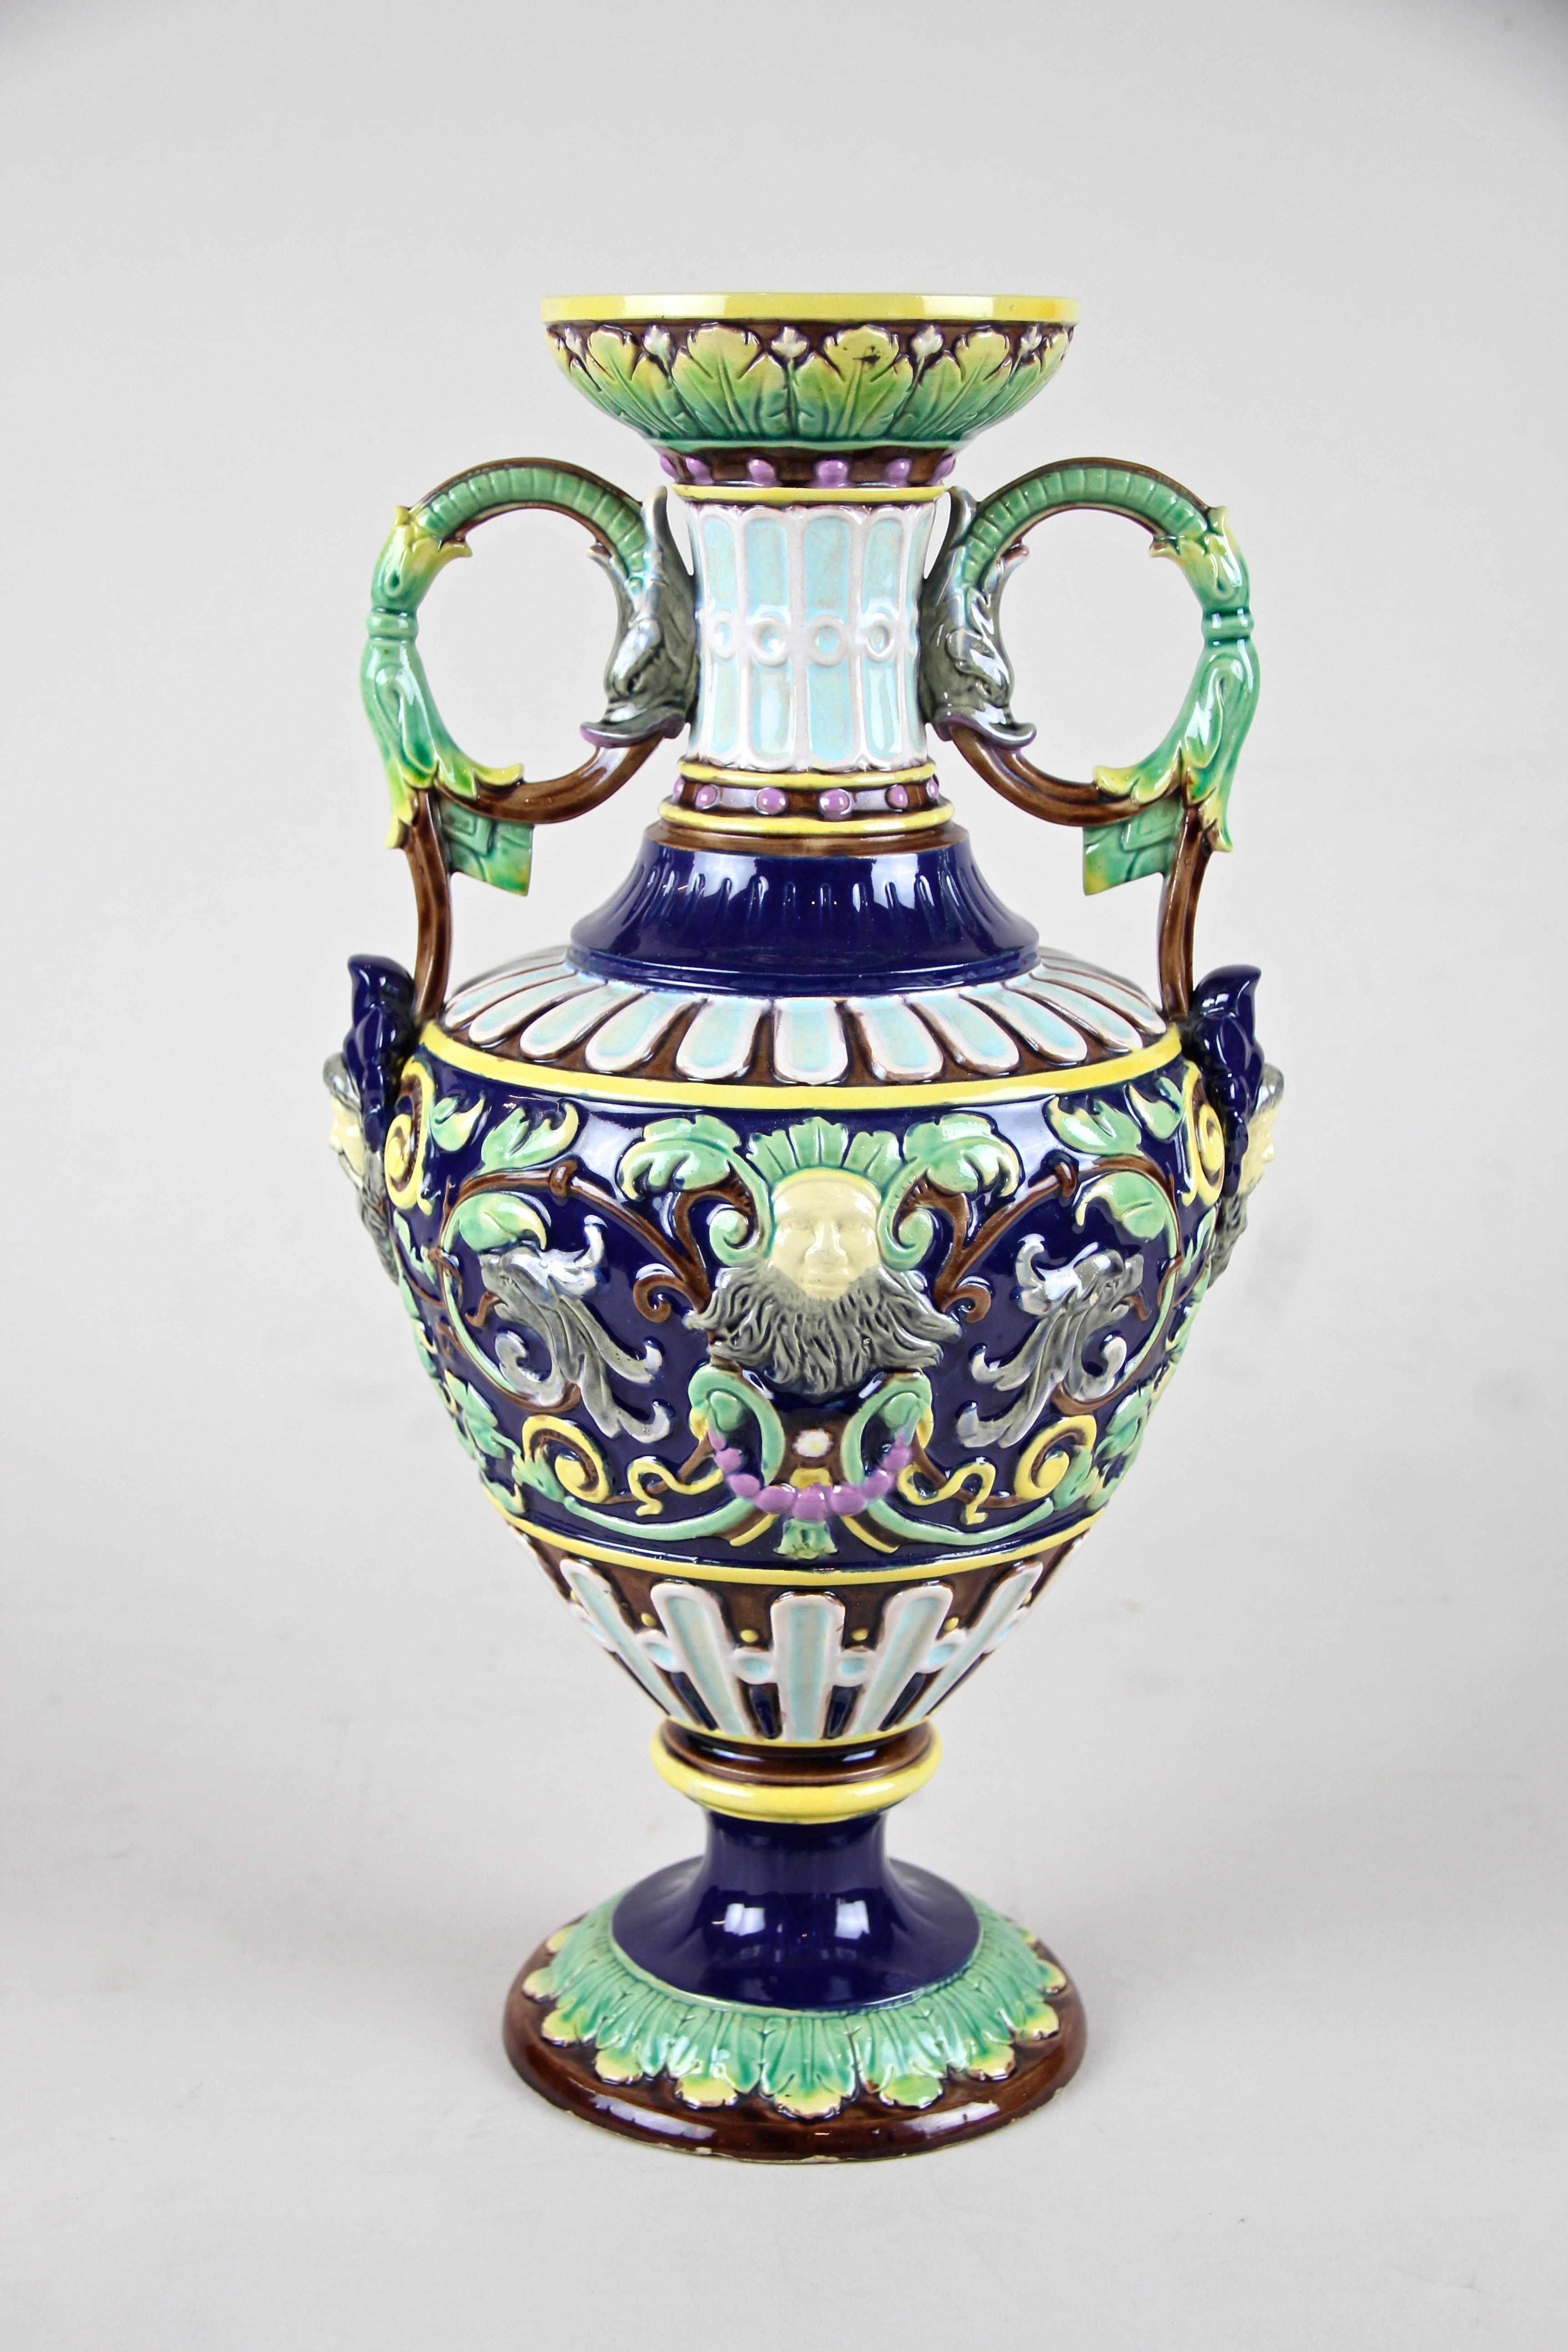 From around 1880 out of Bohemia, now the Czech Republic, comes this lovely colorful Amphora Majolica Vase from the famous company of Wilhelm Schiller & Son. A gorgeous bulbous shape, wonderfully colored in dark blue, brown and green tones gives this